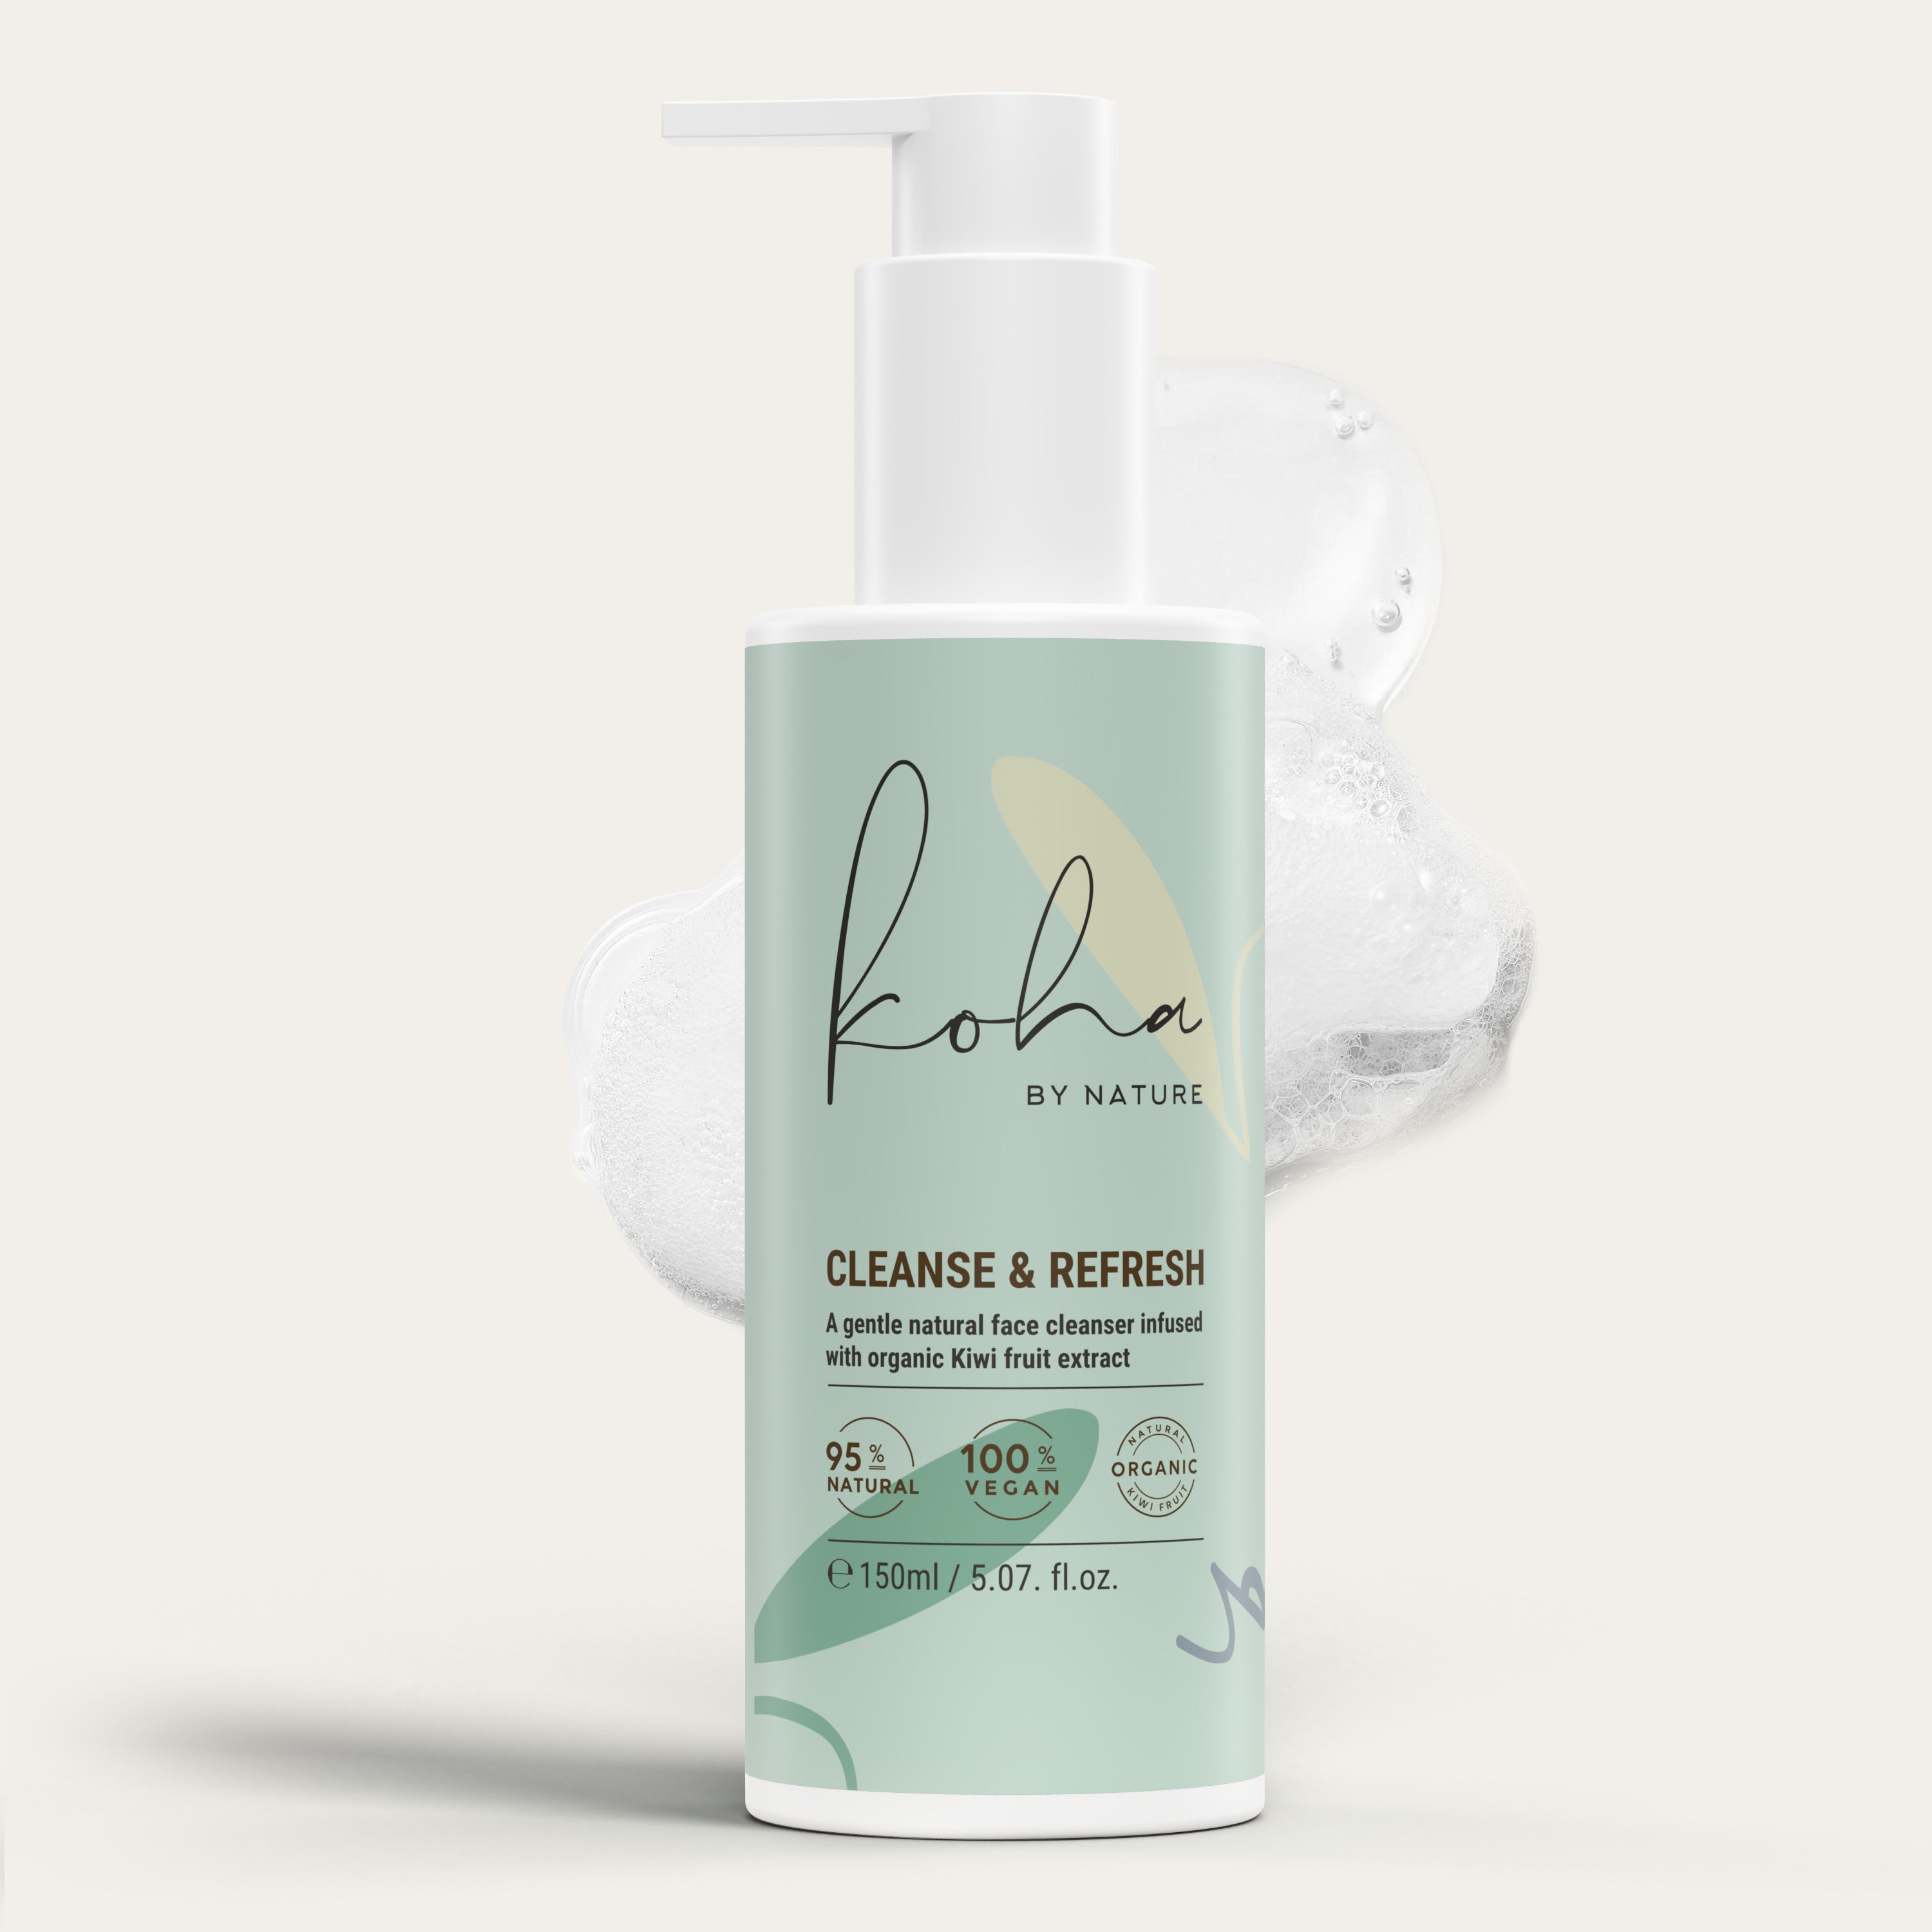 Product image of a 95% natural face wash housed in a white pump bottle adorned with a soft green label. The sleek design of the bottle exudes cleanliness and modernity, while the green label suggests the inclusion of natural ingredients. Against a neutral backdrop, the product stands out, promising a refreshing and gentle cleansing experience. The combination of natural efficacy and contemporary packaging invites users to embrace a revitalizing skincare routine.